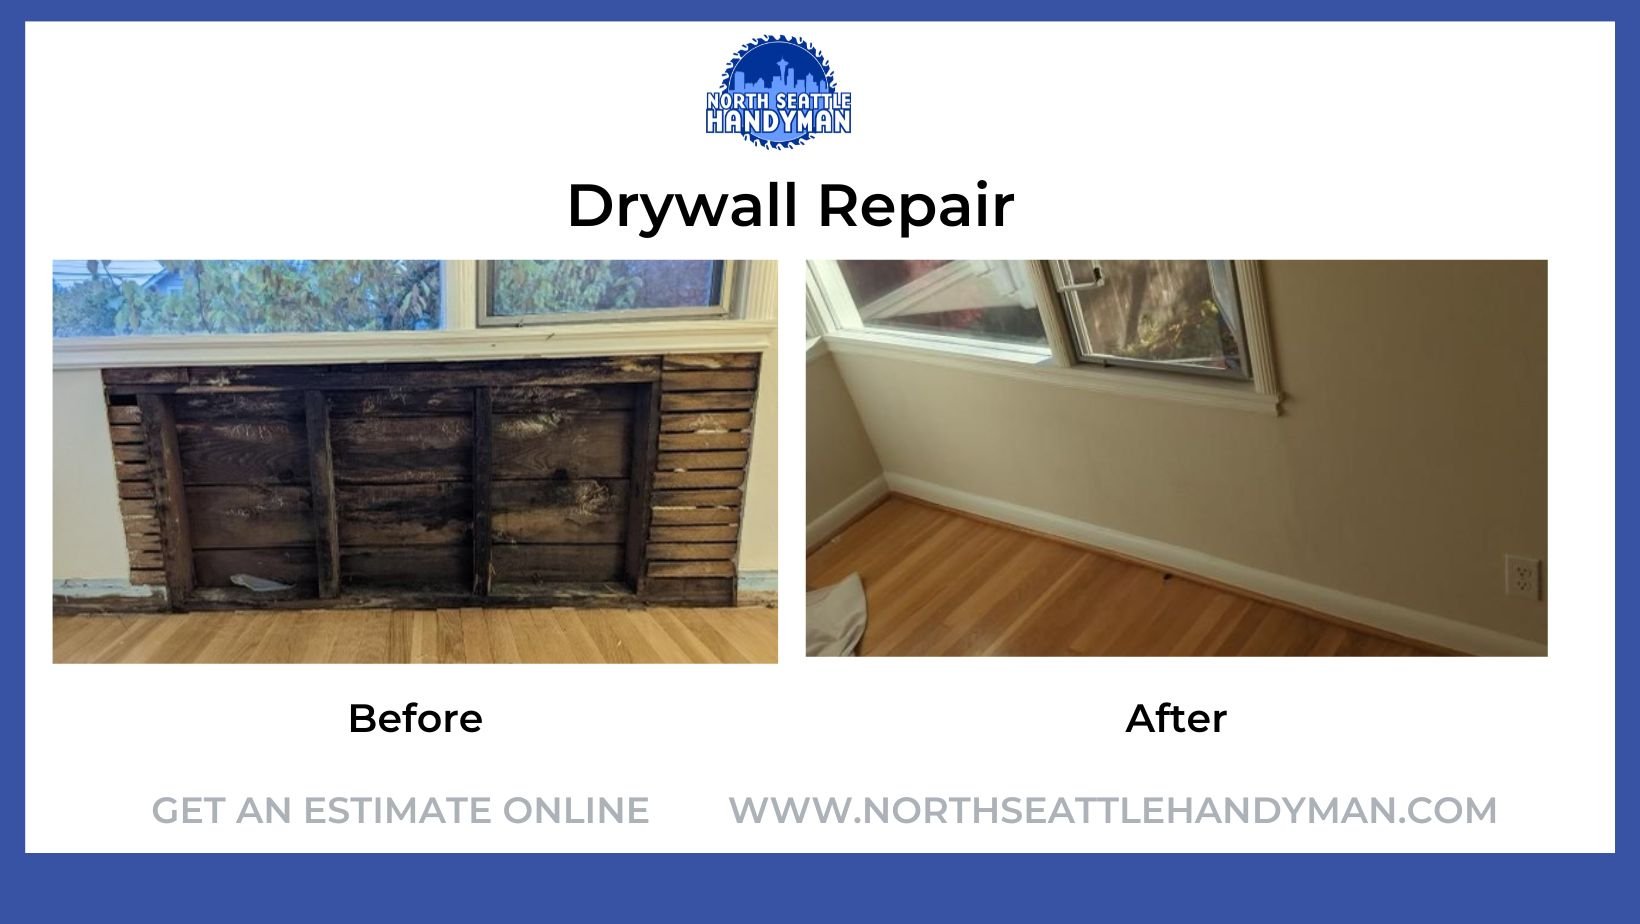 Drywall repair before and after in Seattle by North Seattle Handyman